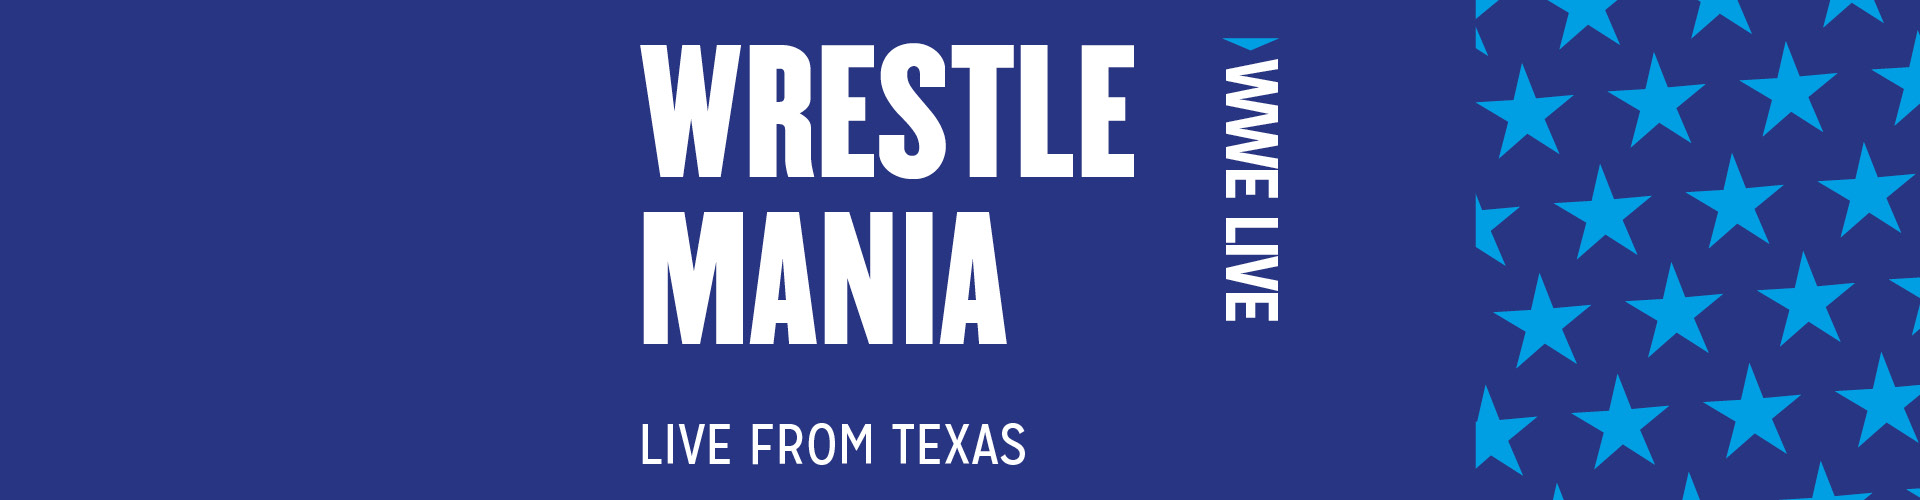 WrestleMania, WWE Live, Live from Texas